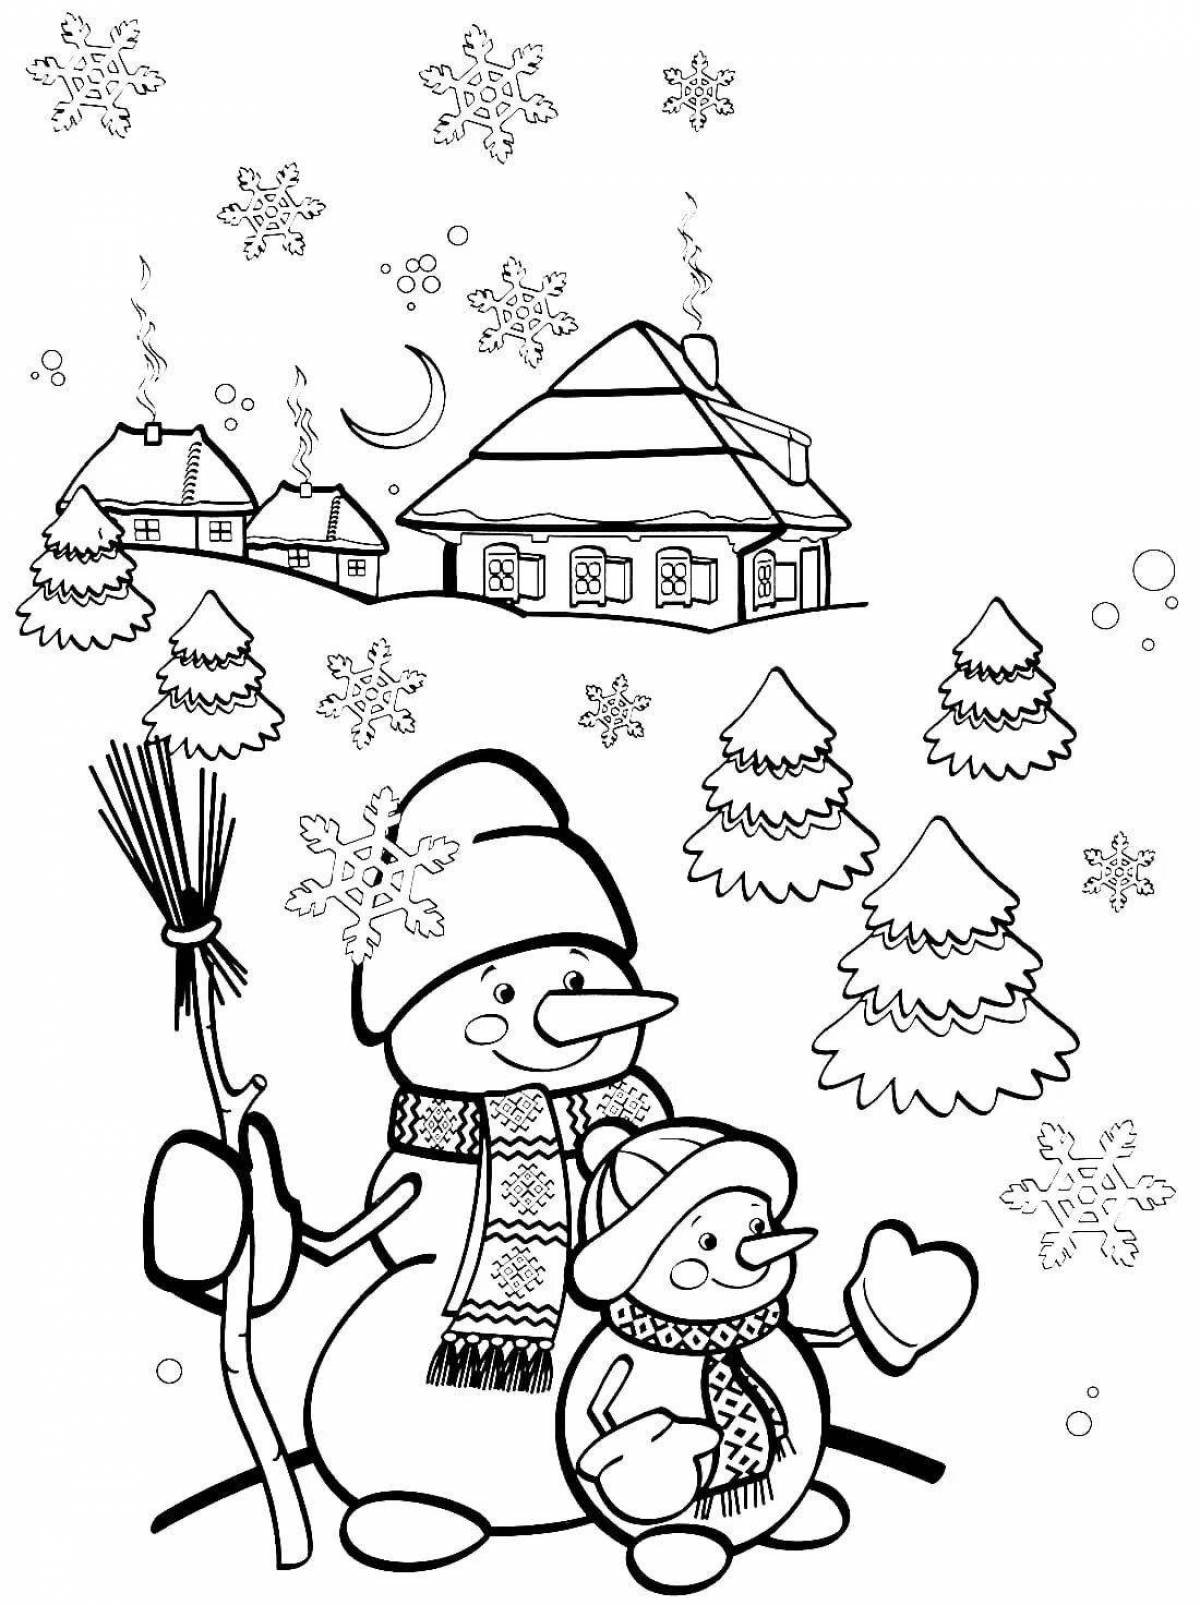 Playful winter coloring book for kids 6-7 years old